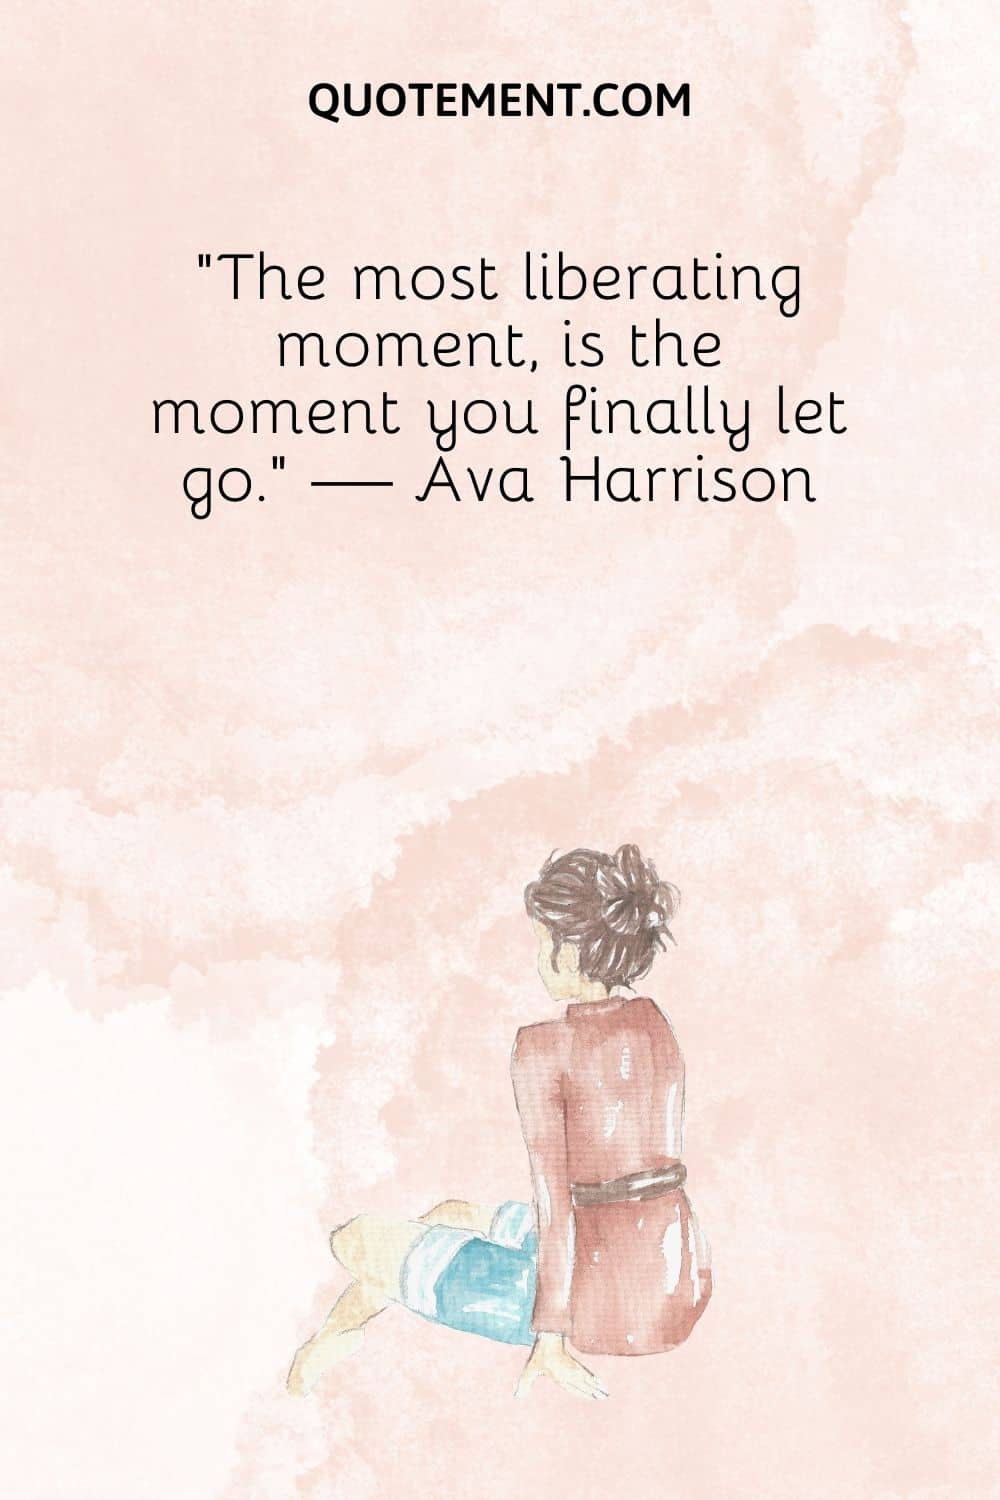 The most liberating moment, is the moment you finally let go